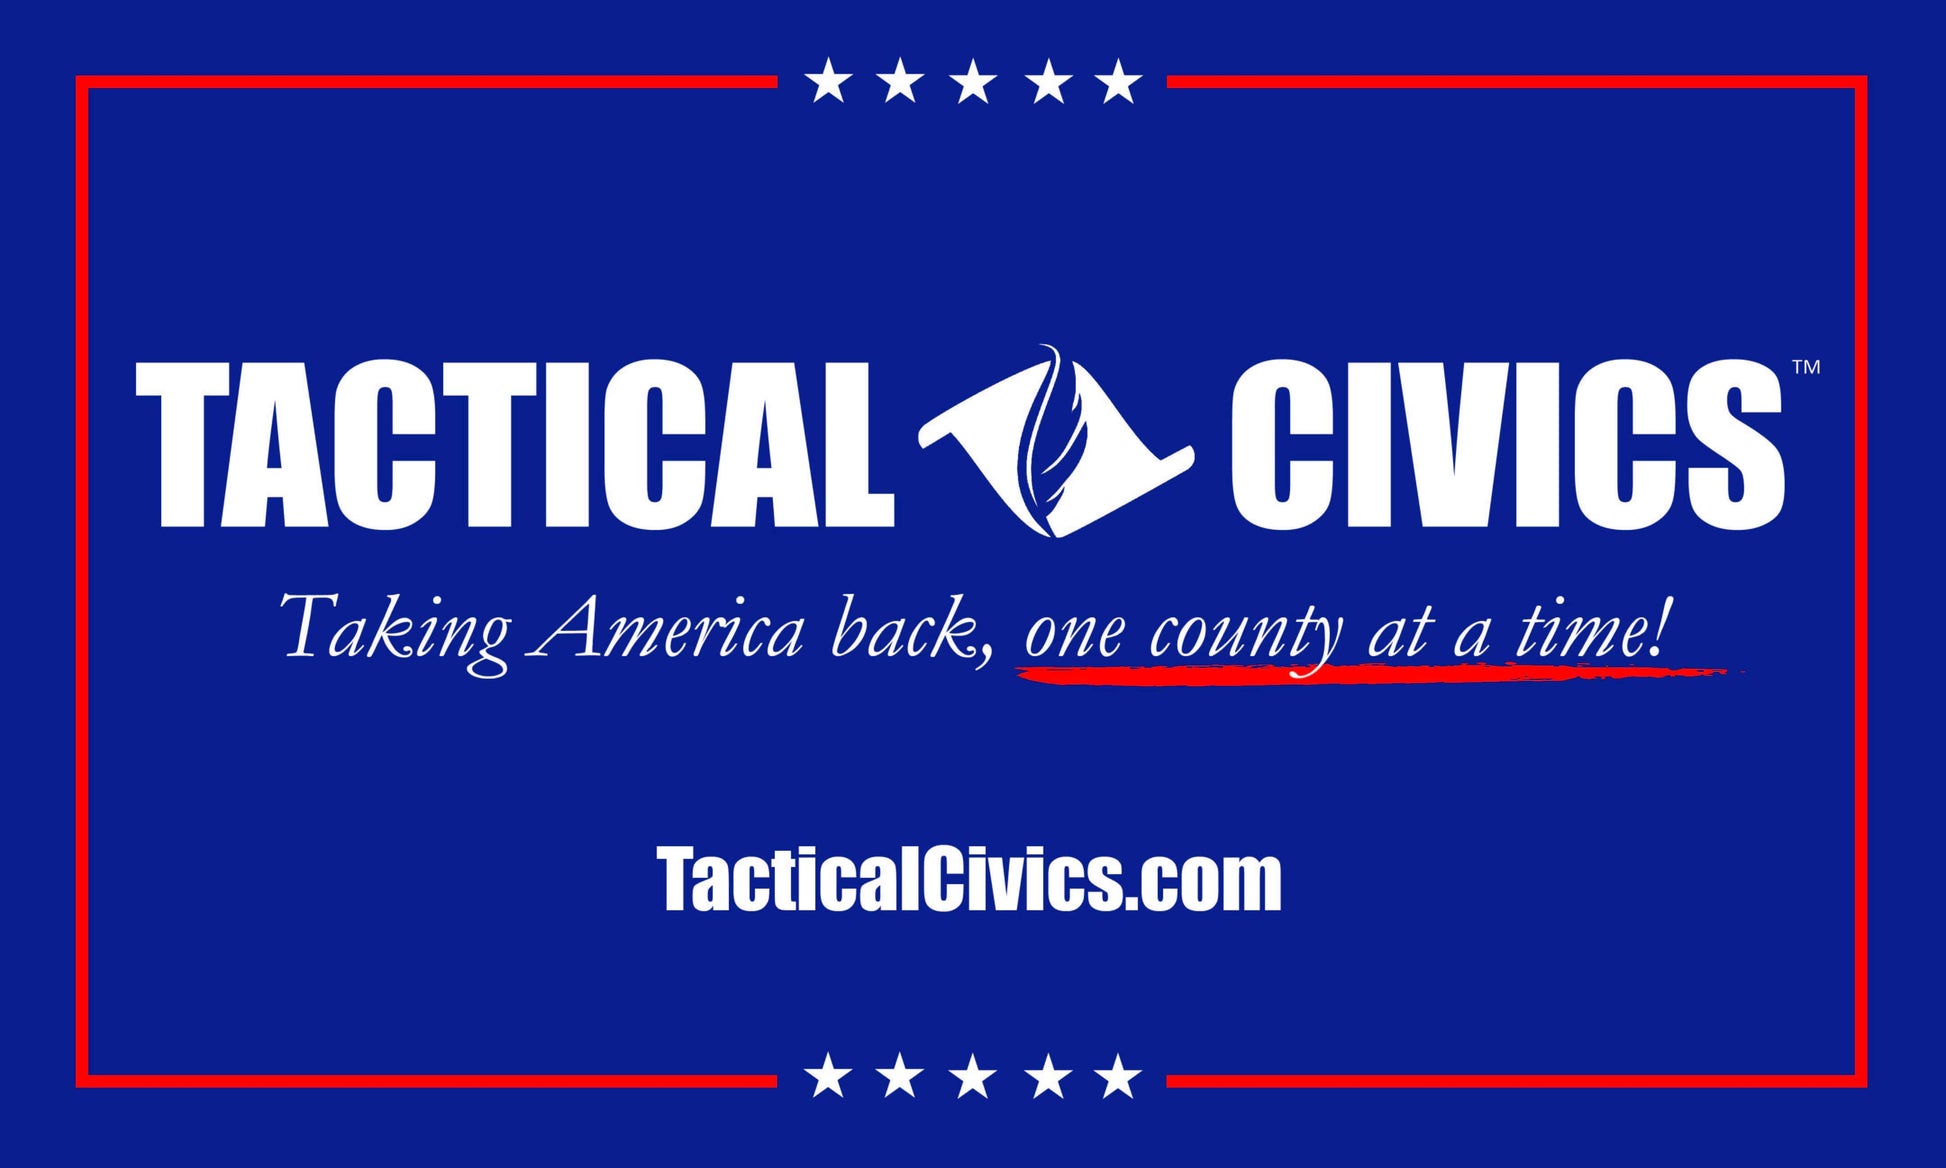 festflags Country 3 X 5 Feet / Single Sided Tactical Civics Flag - (One County at a Time)